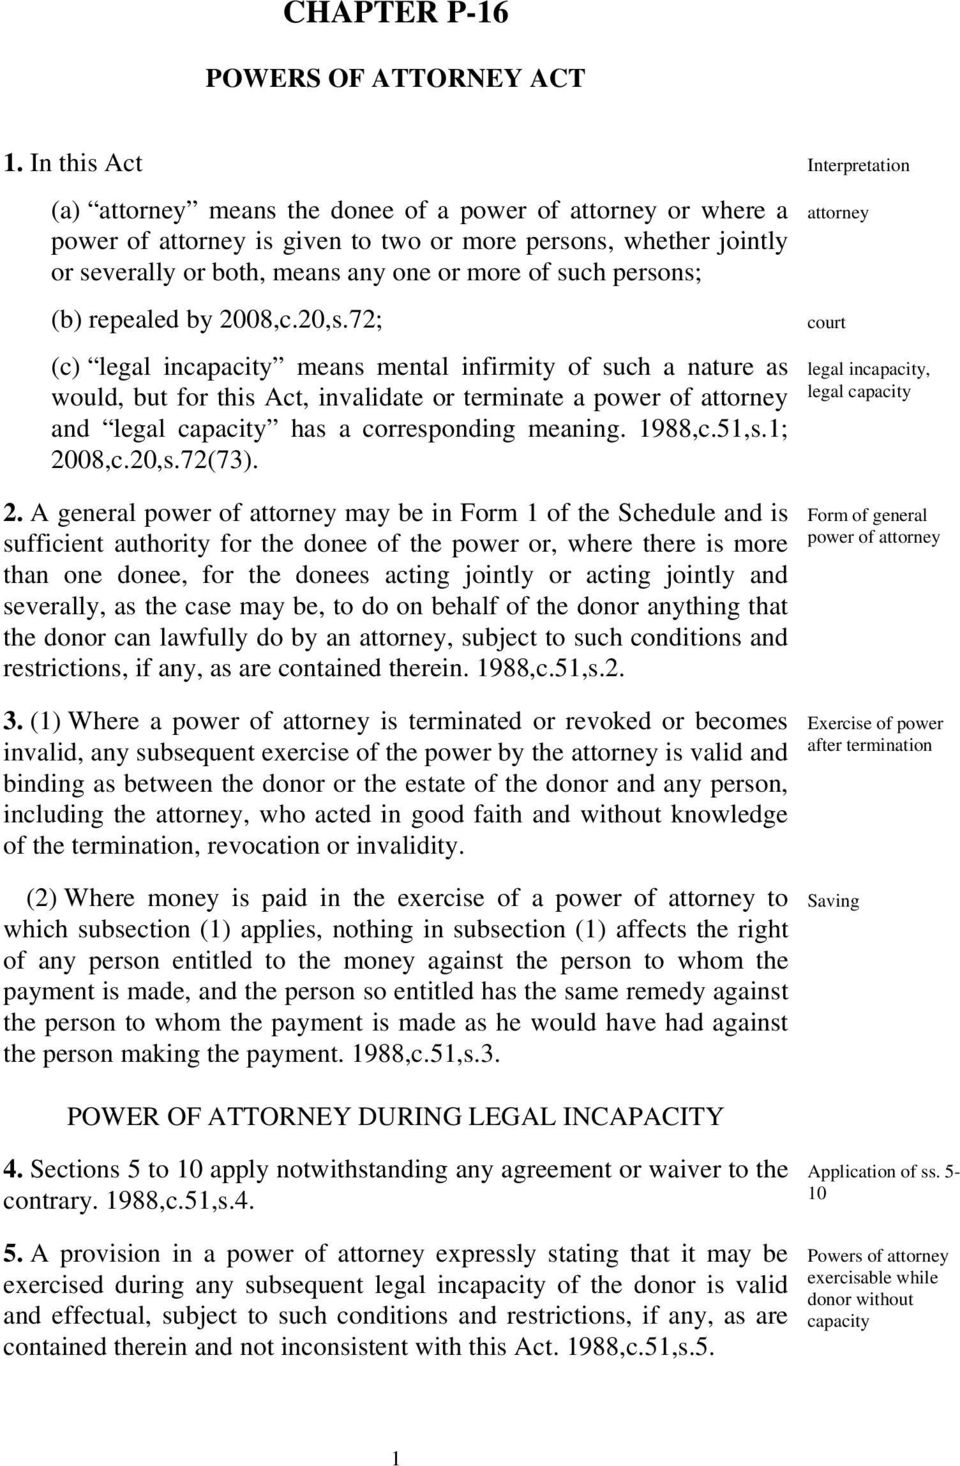 20,s.72; (c) legal incapacity means mental infirmity of such a nature as would, but for this Act, invalidate or terminate a power of and legal capacity has a corresponding meaning. 1988,c.51,s.